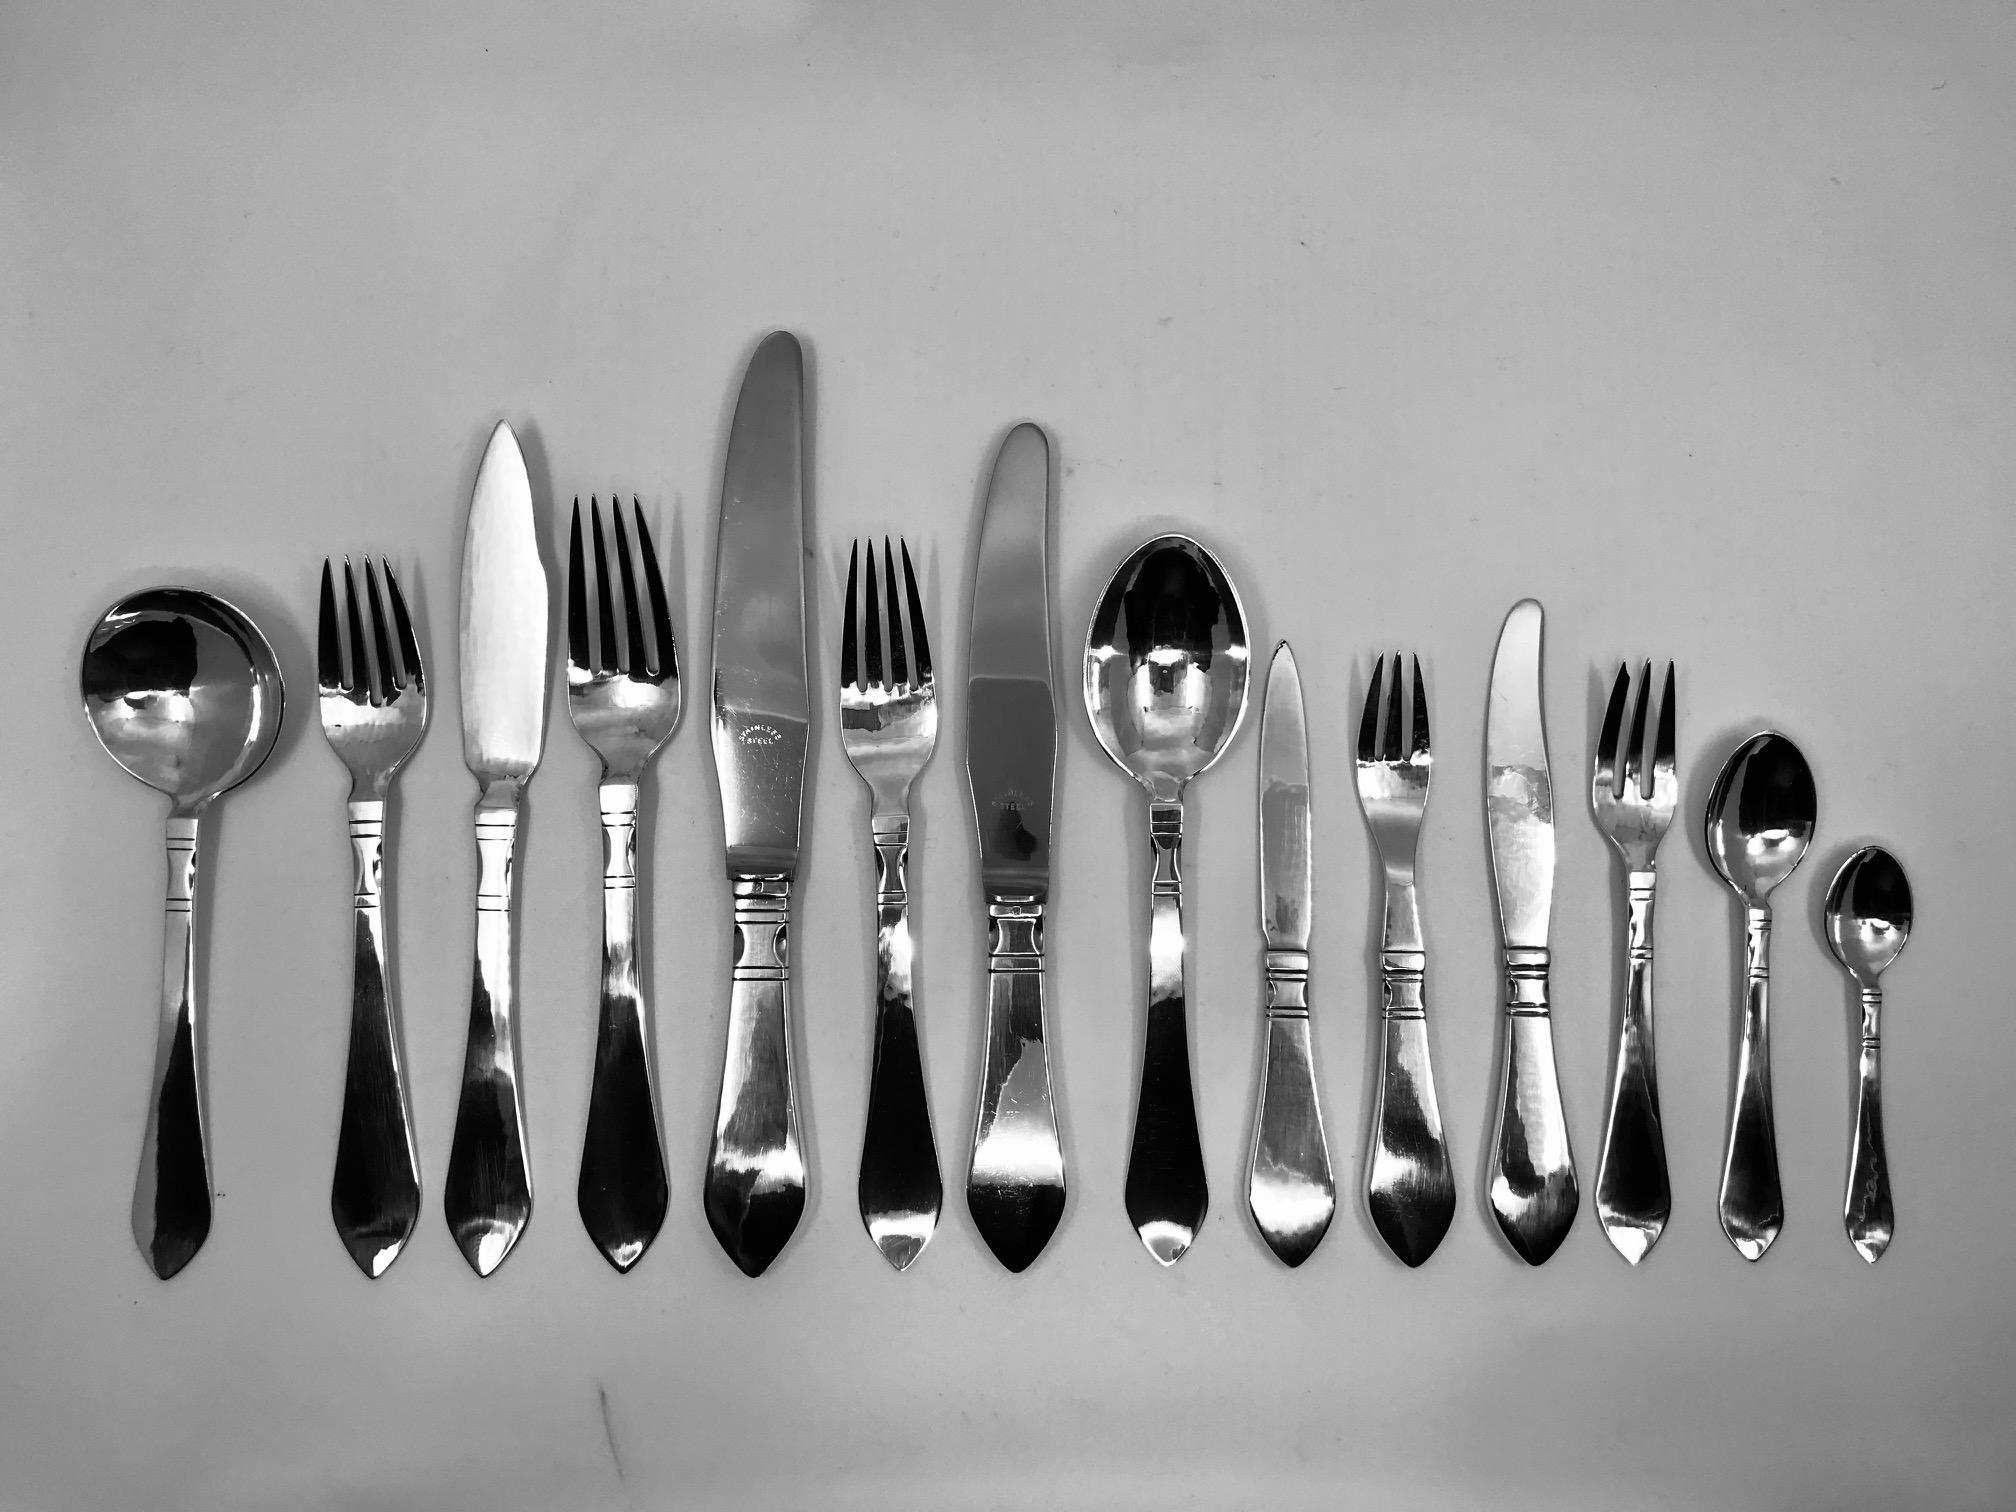 This is a very large Georg Jensen sterling silverware service in the Continental pattern, design #4 by Georg Jensen from 1906.
This set comprises 18 settings of 14 pieces, plus extra pieces –
18 dinner knives 8 15/16? (23.7cm)
18 dinner forks 7